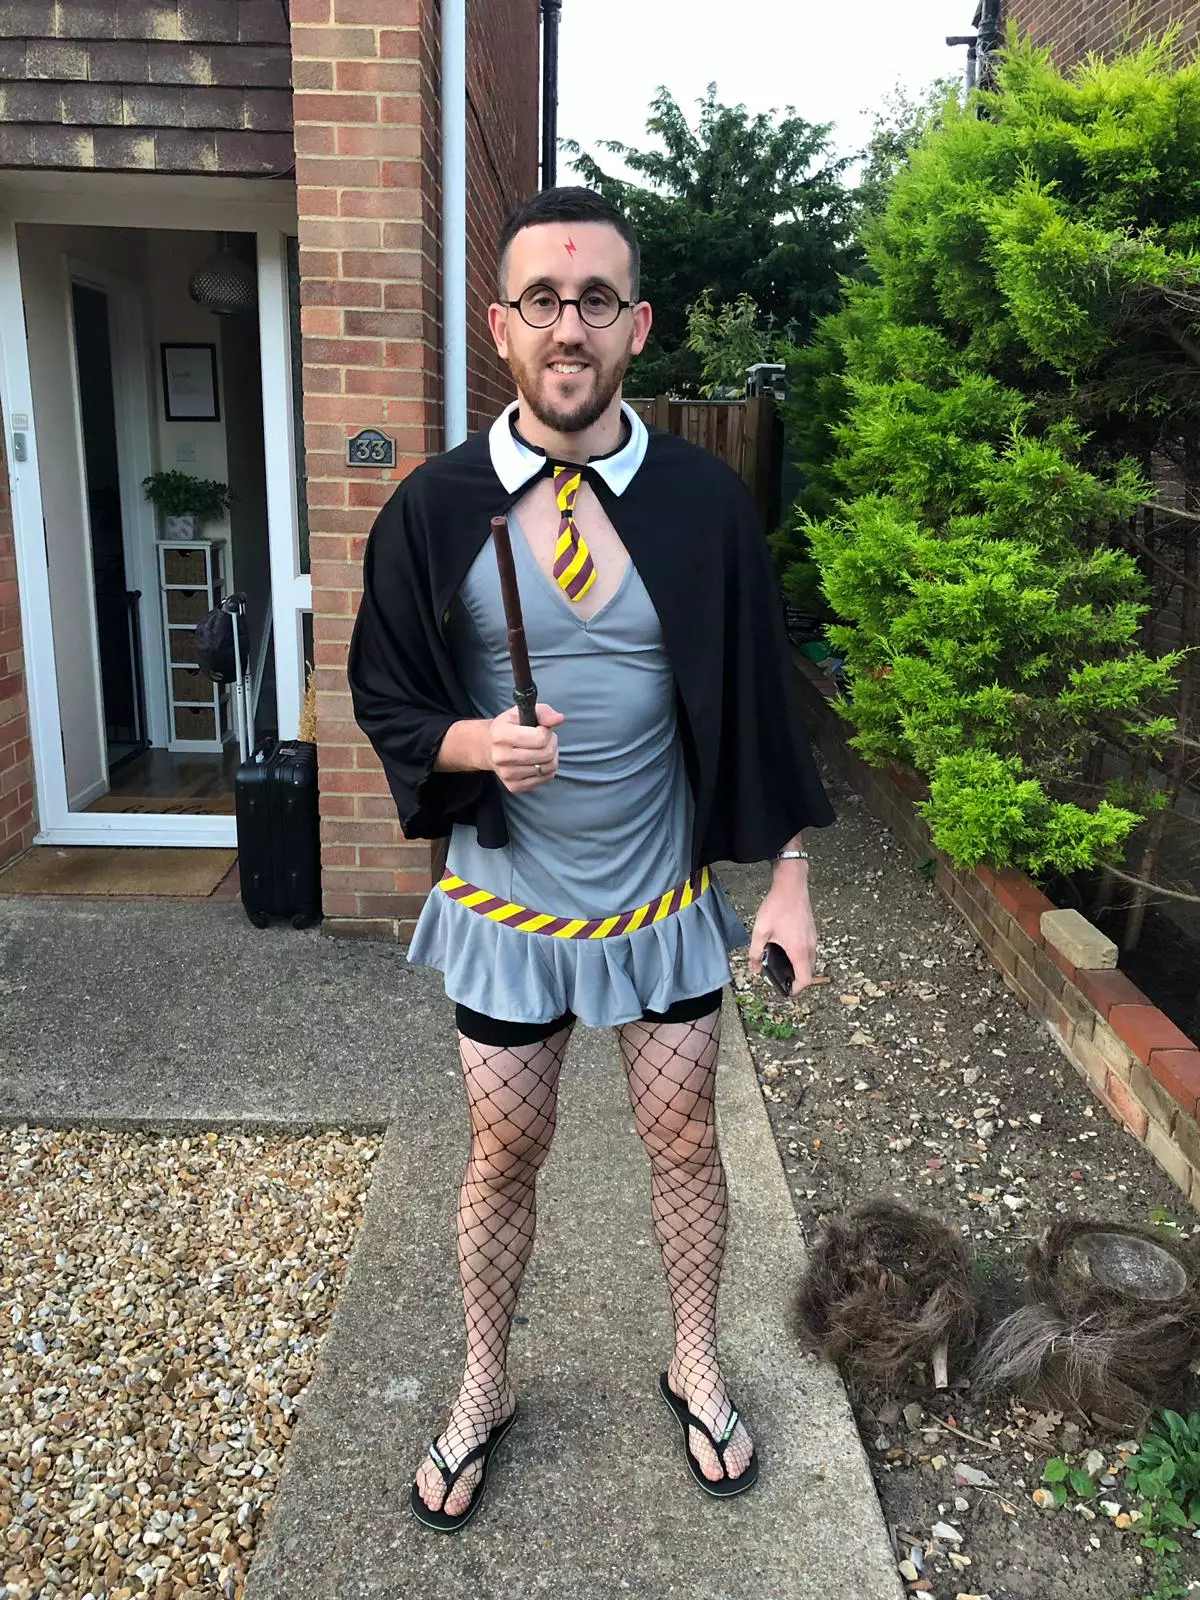 The group also dressed Liam up as Harry Potter.